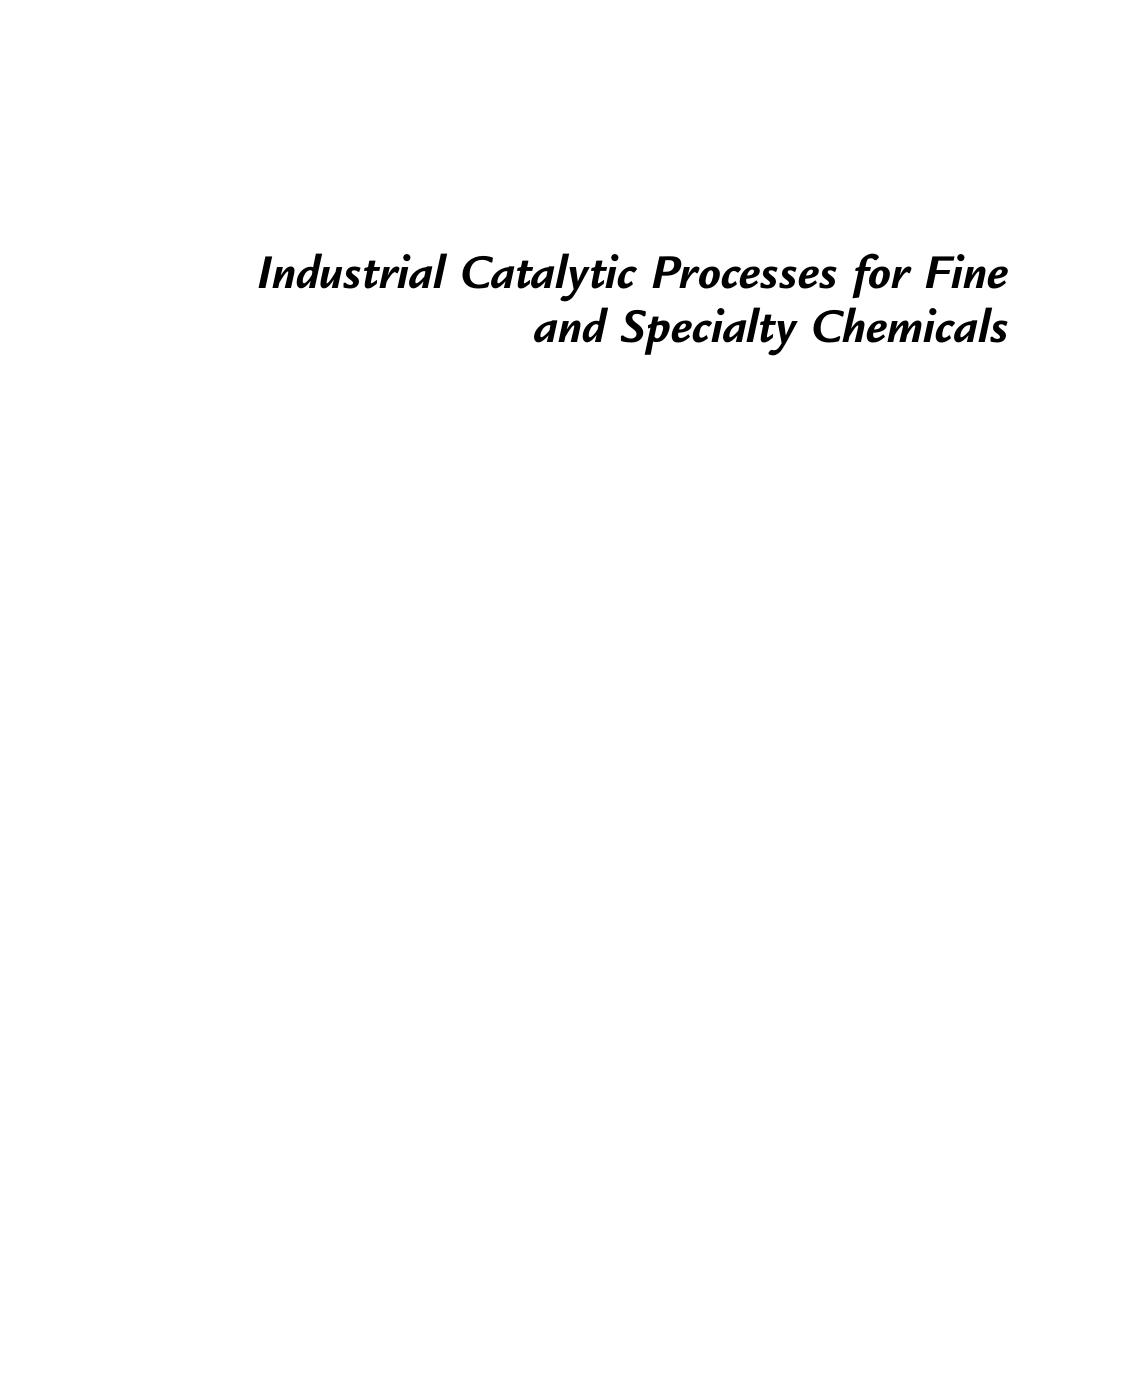 Industrial Catalytic Processes for Fine and Specialty Chemicals 2016